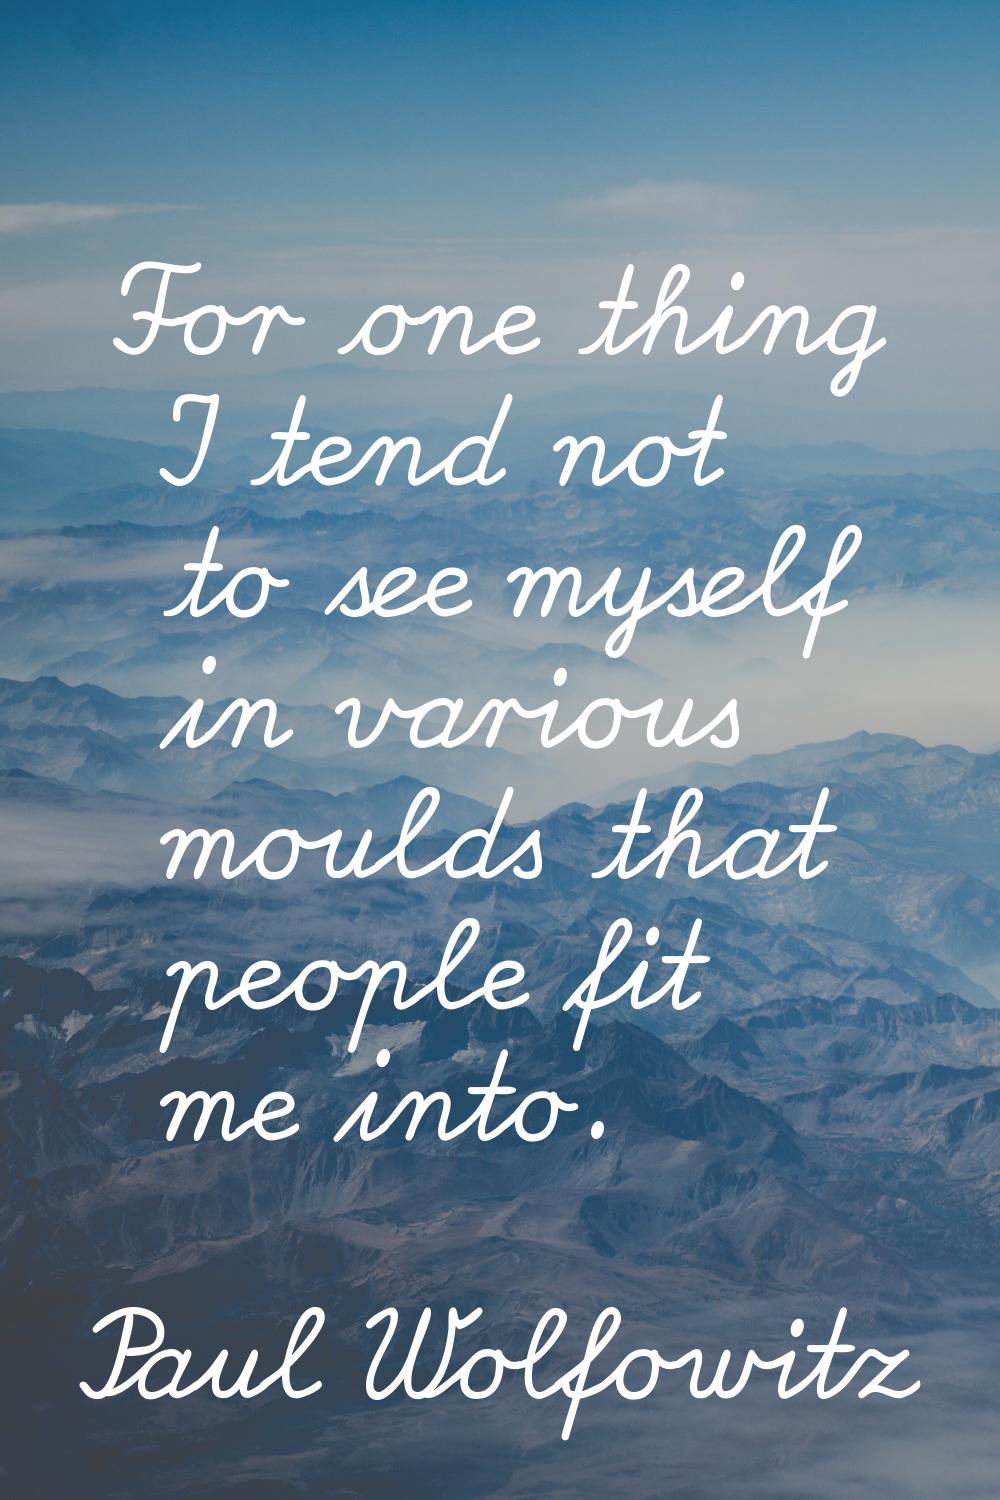 For one thing I tend not to see myself in various moulds that people fit me into.